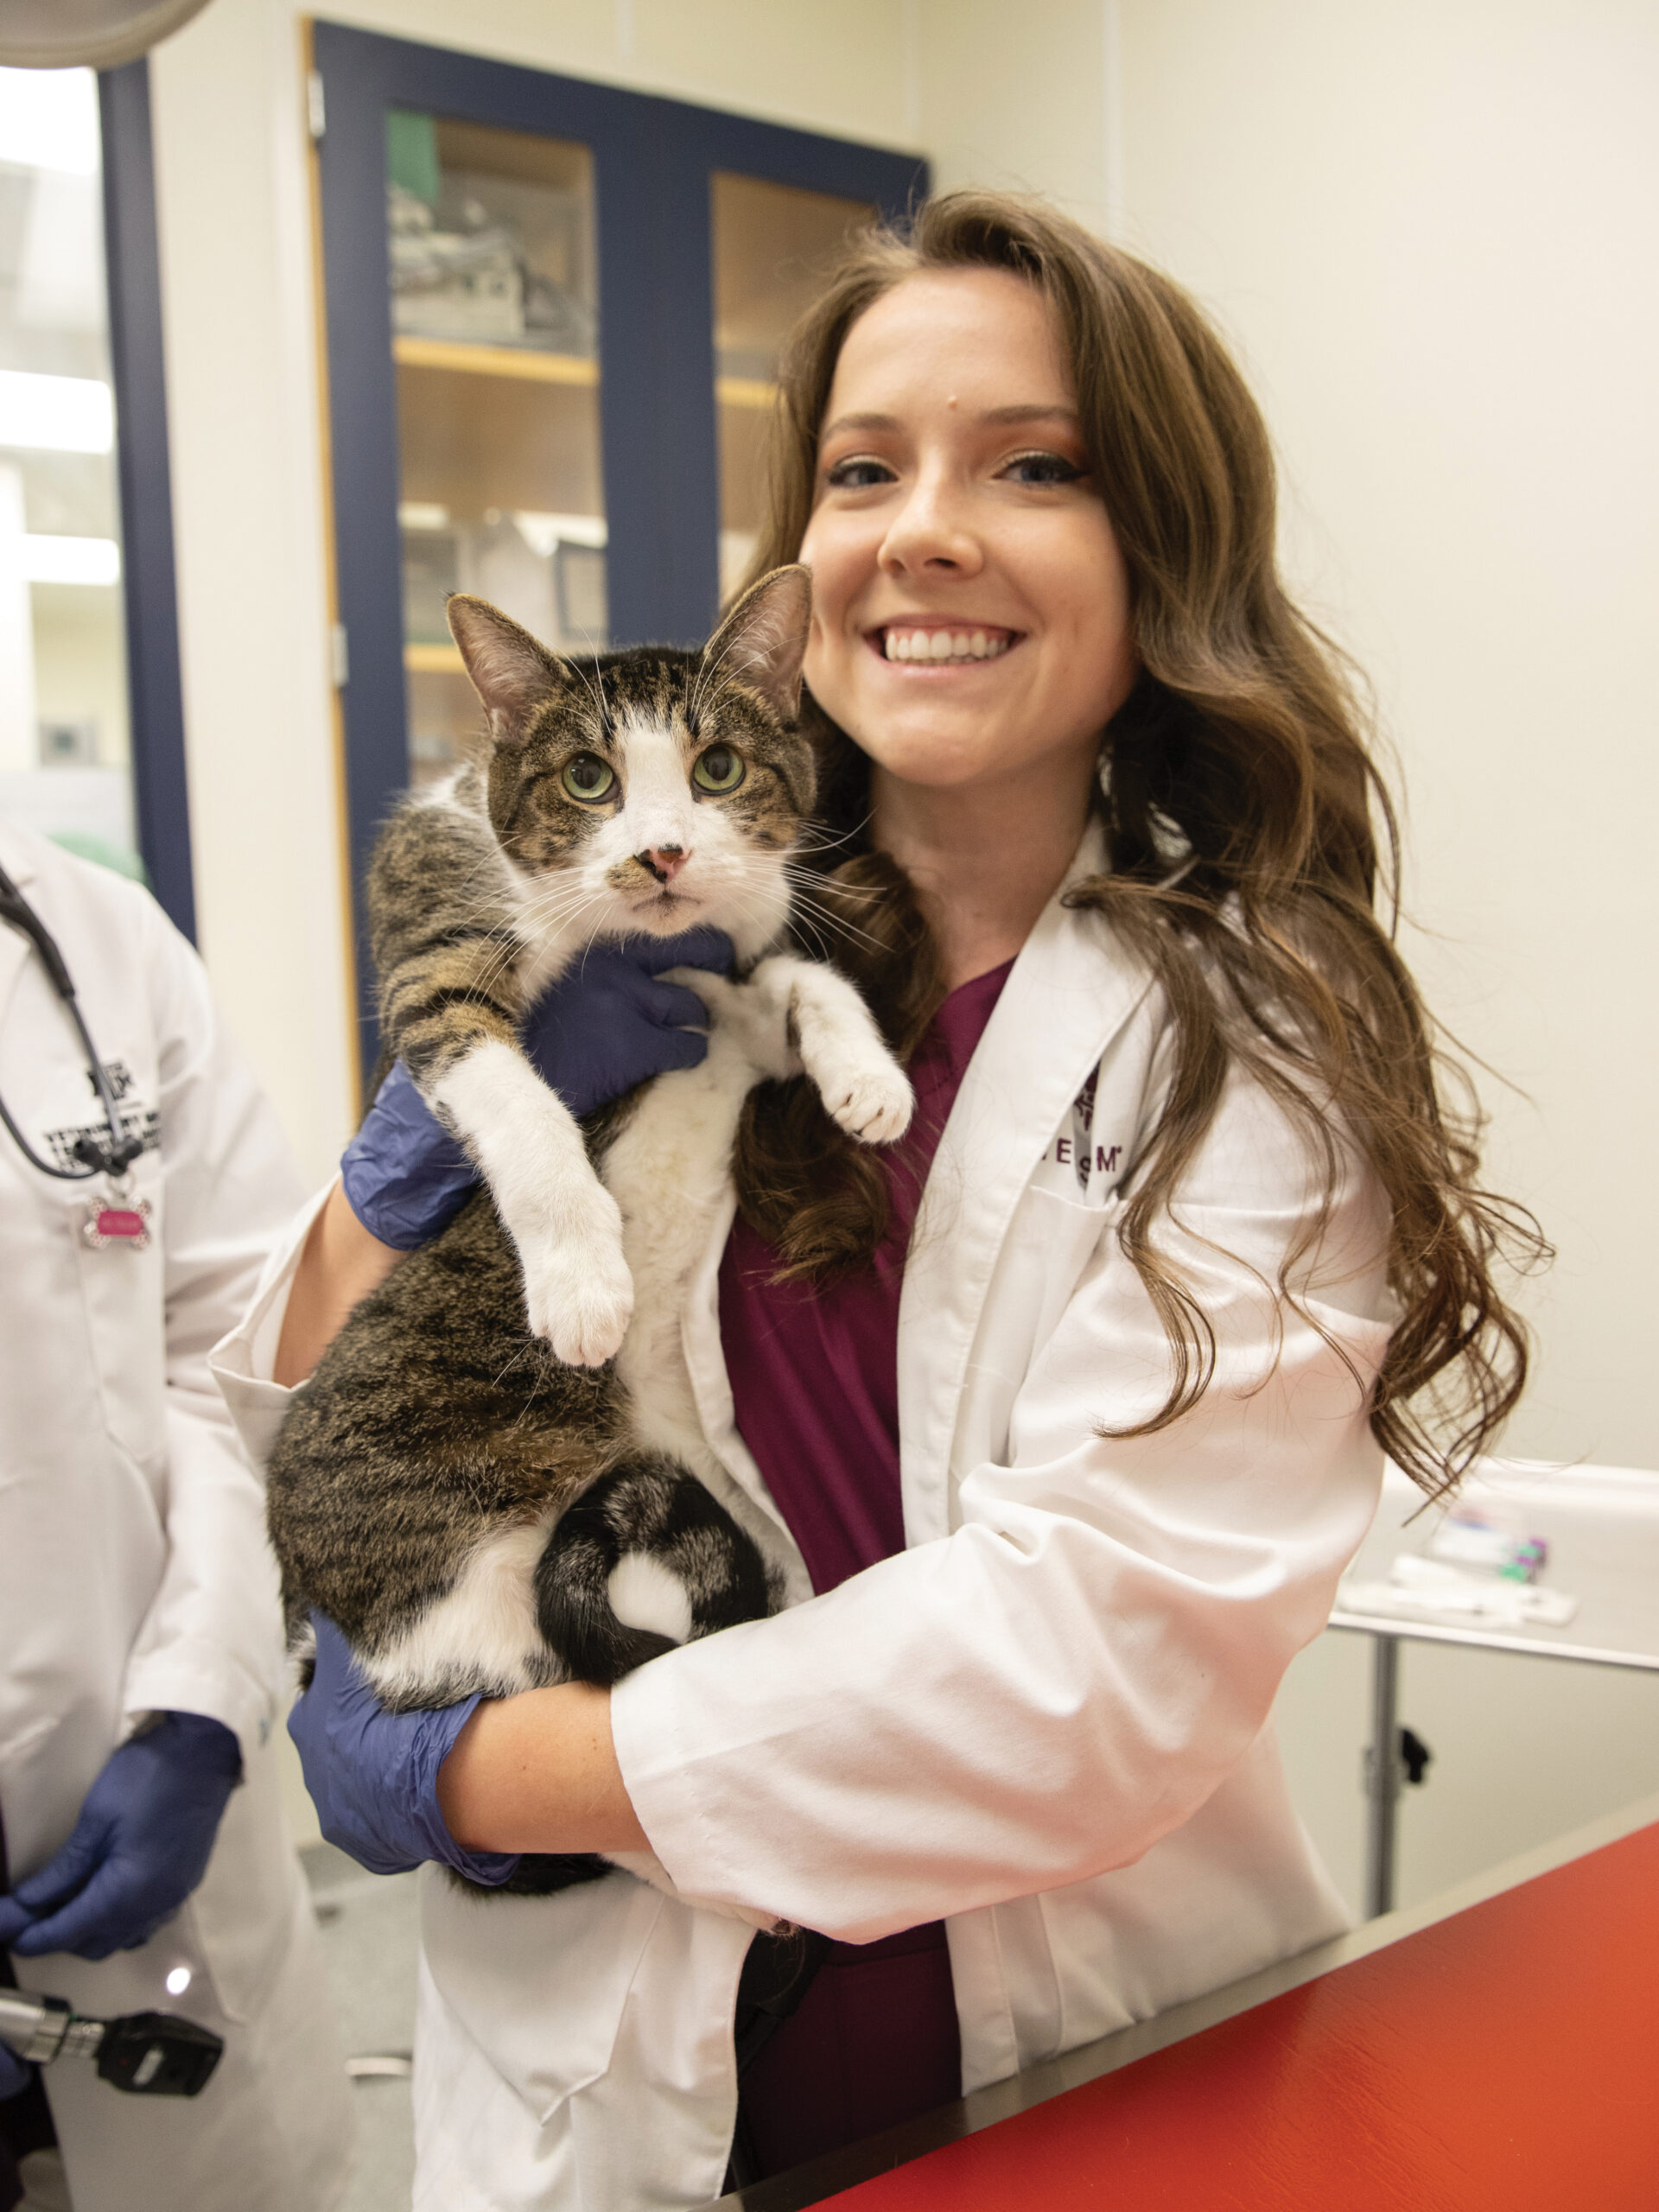 A veterinary student in a white coat holding a tabby cat